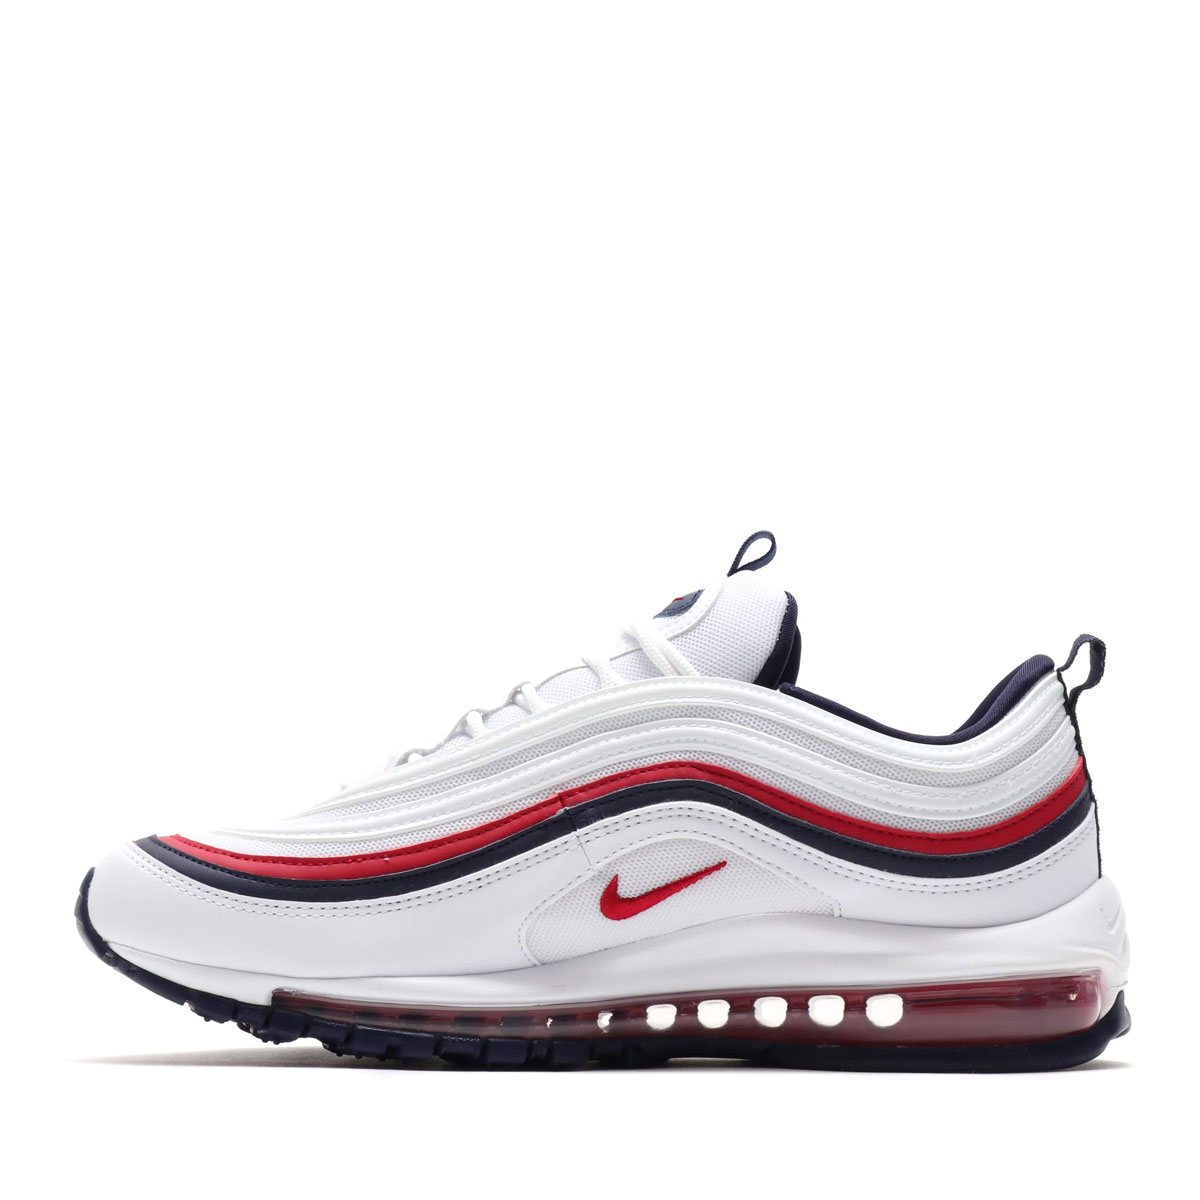 red and white air max 97